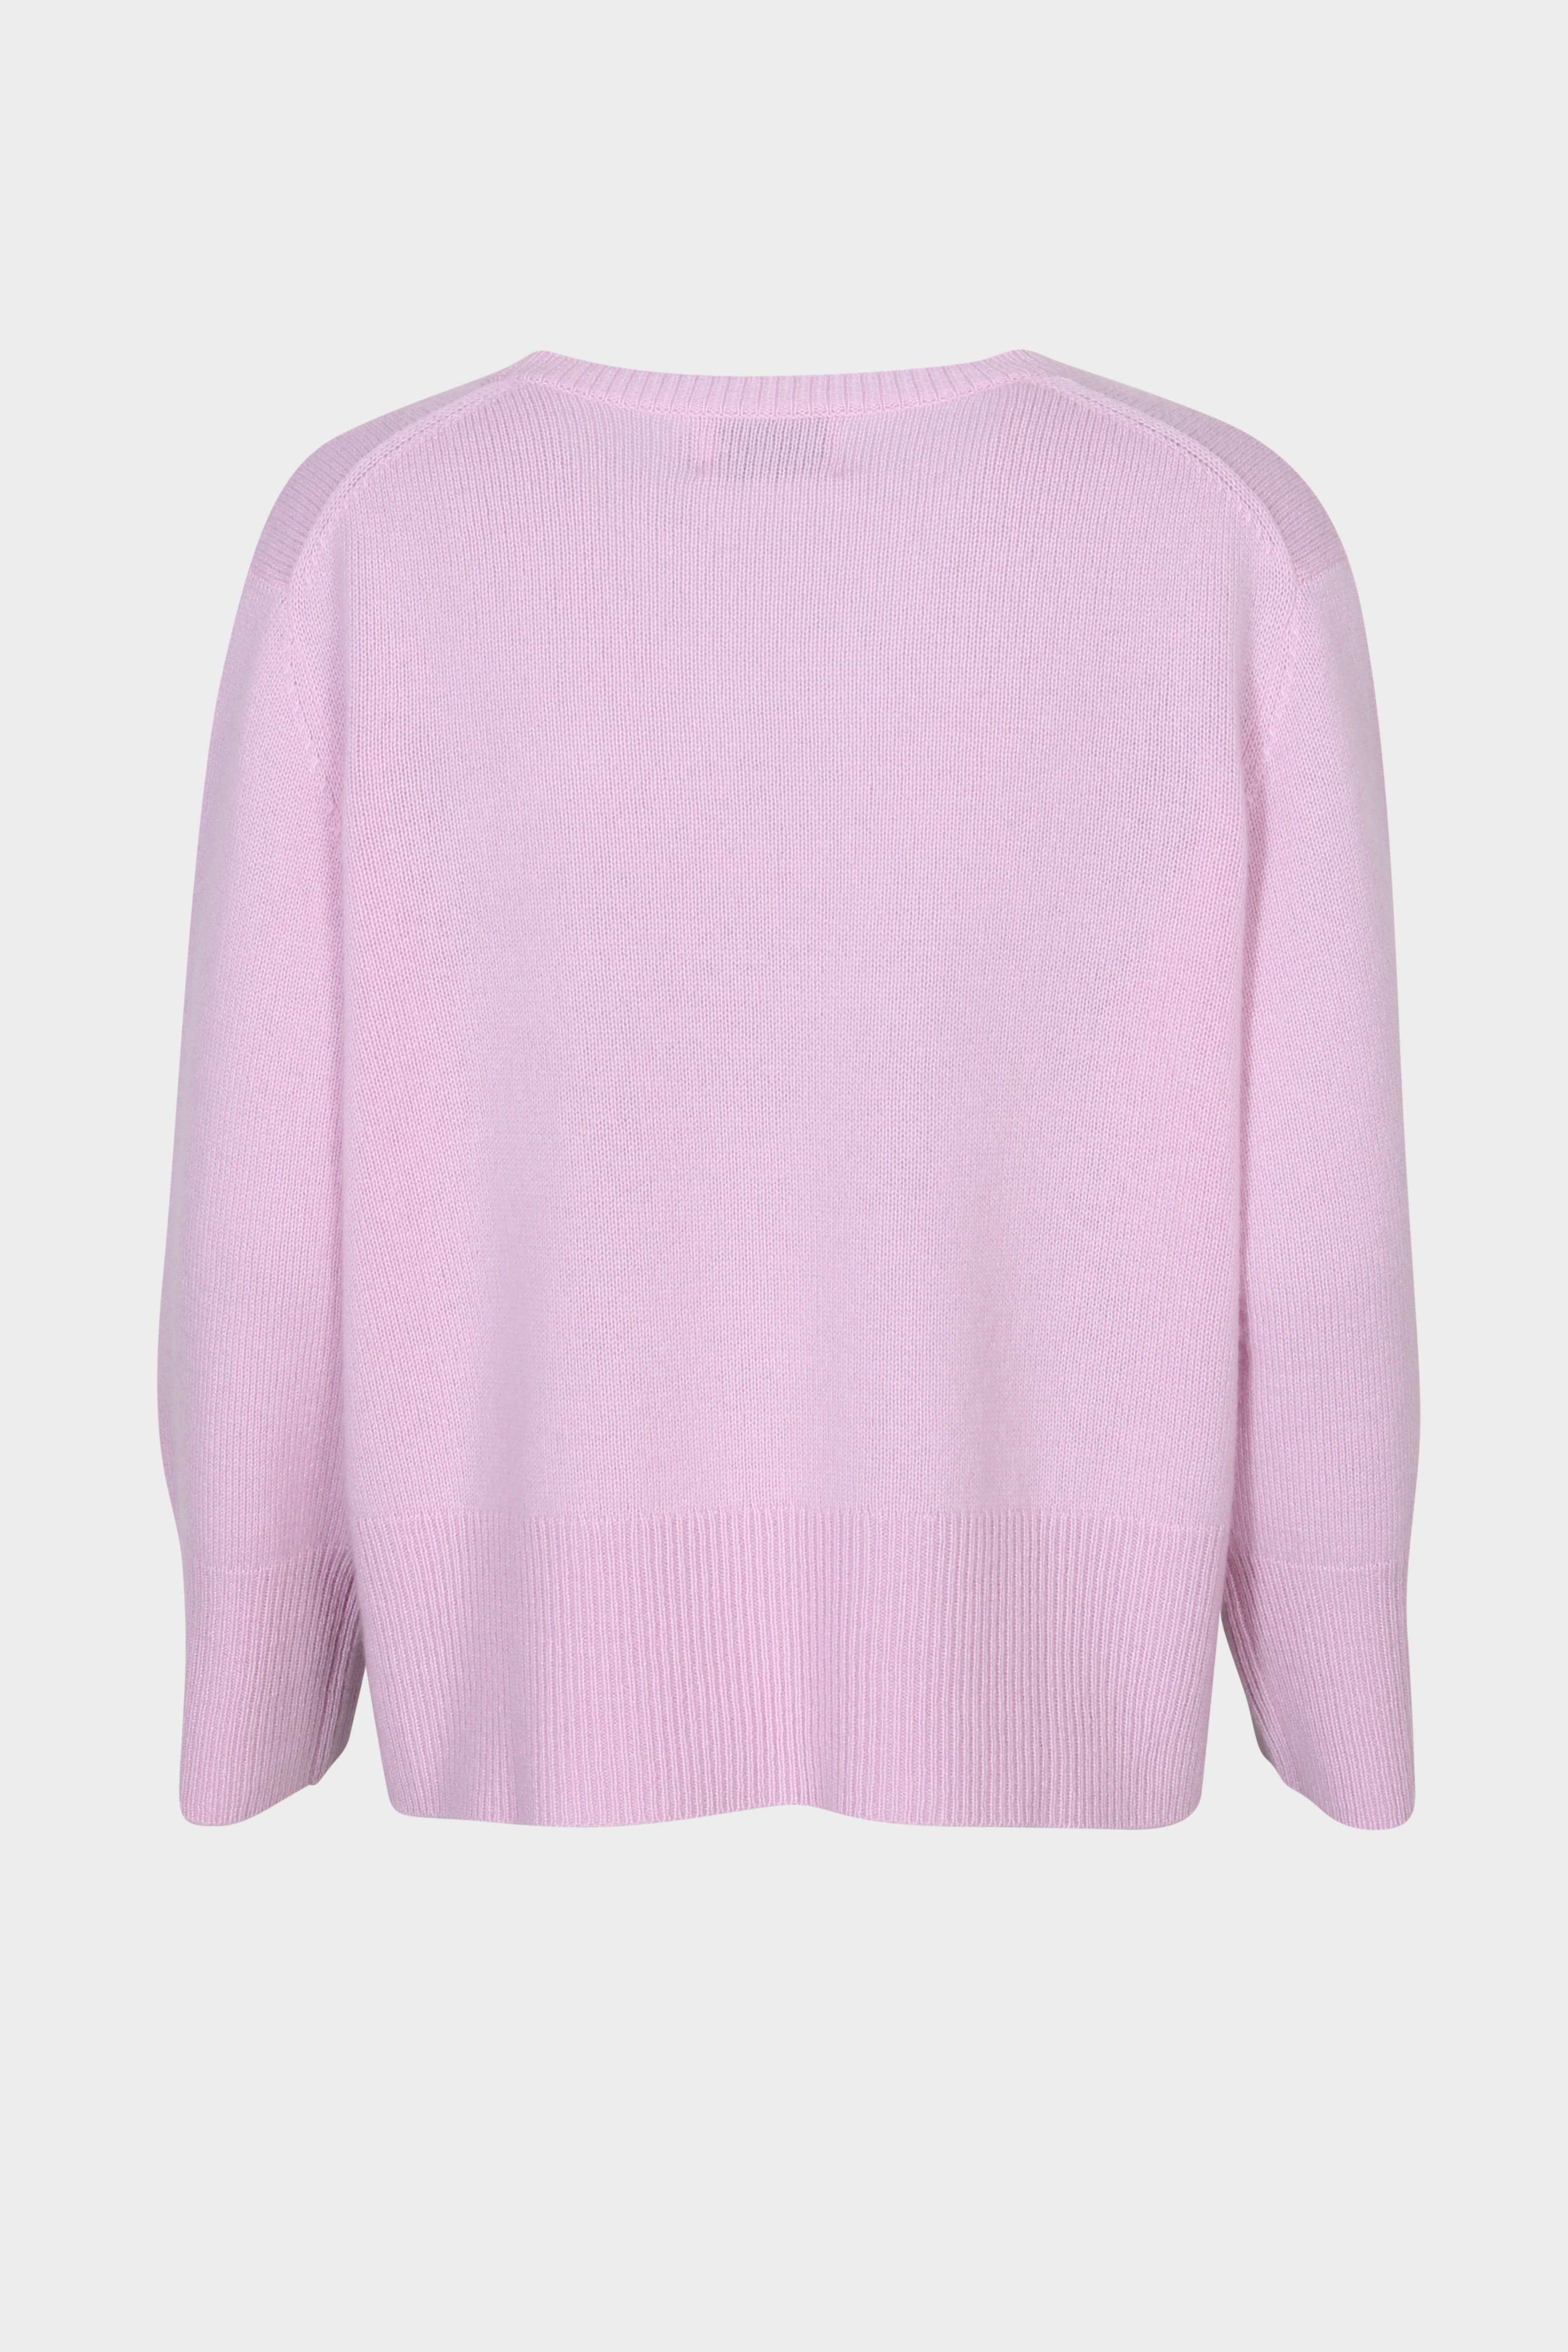 FLONA Cashmere Sweater in Pink XS